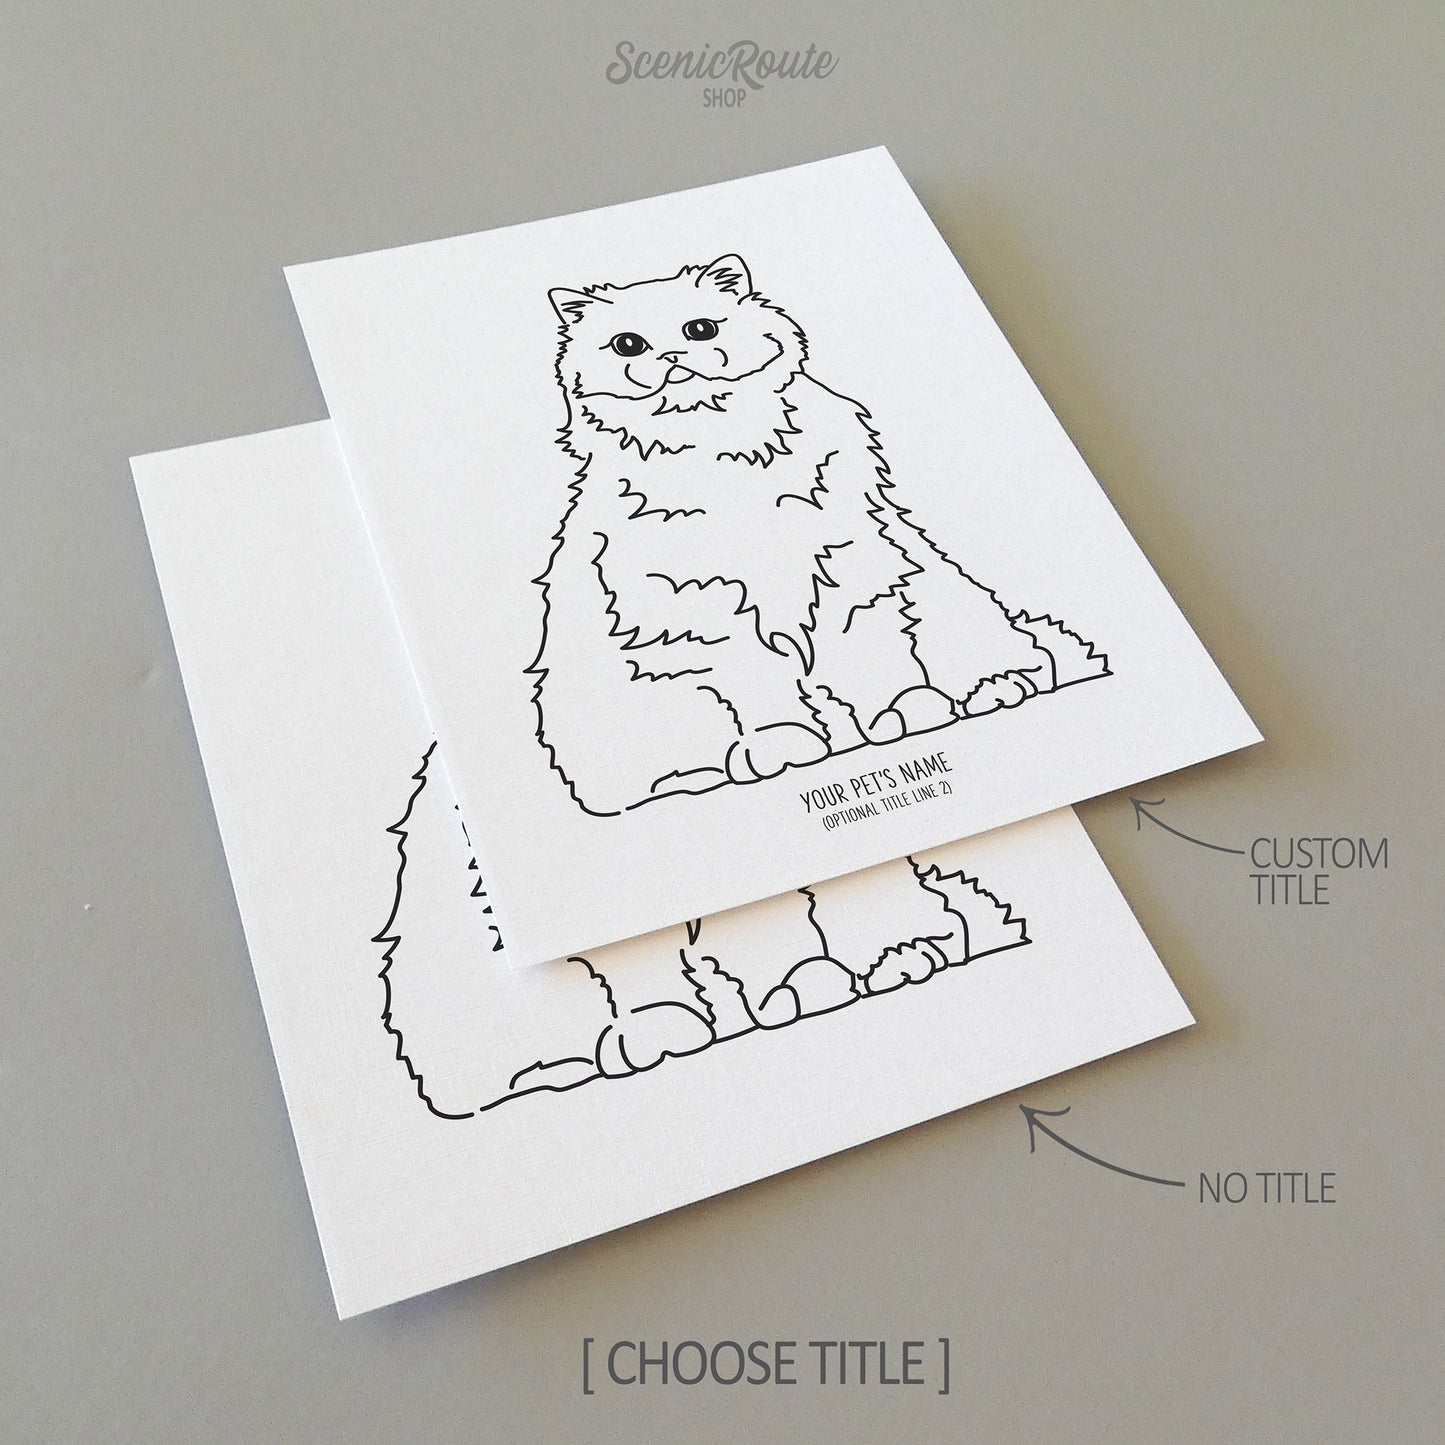 Two line art drawings of a Persian Cat on white linen paper with a gray background.  The pieces are shown with “No Title” and “Custom Title” options for the available art print options.